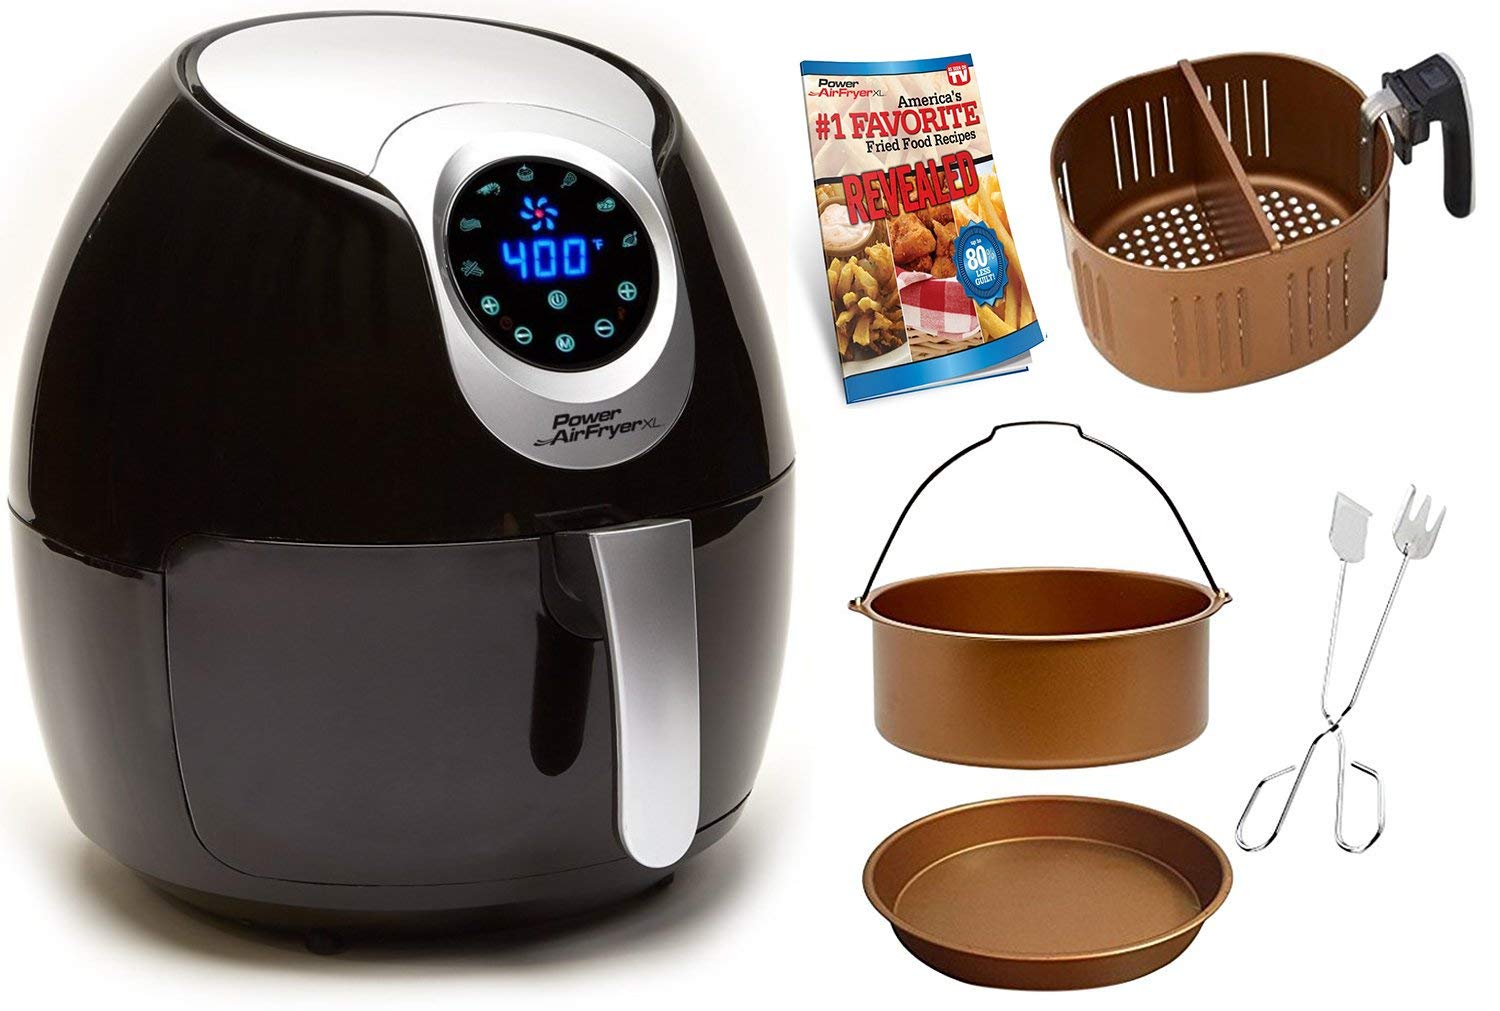 Top 5 Air Fryer Reviews: Make Your Meals Healthier 3